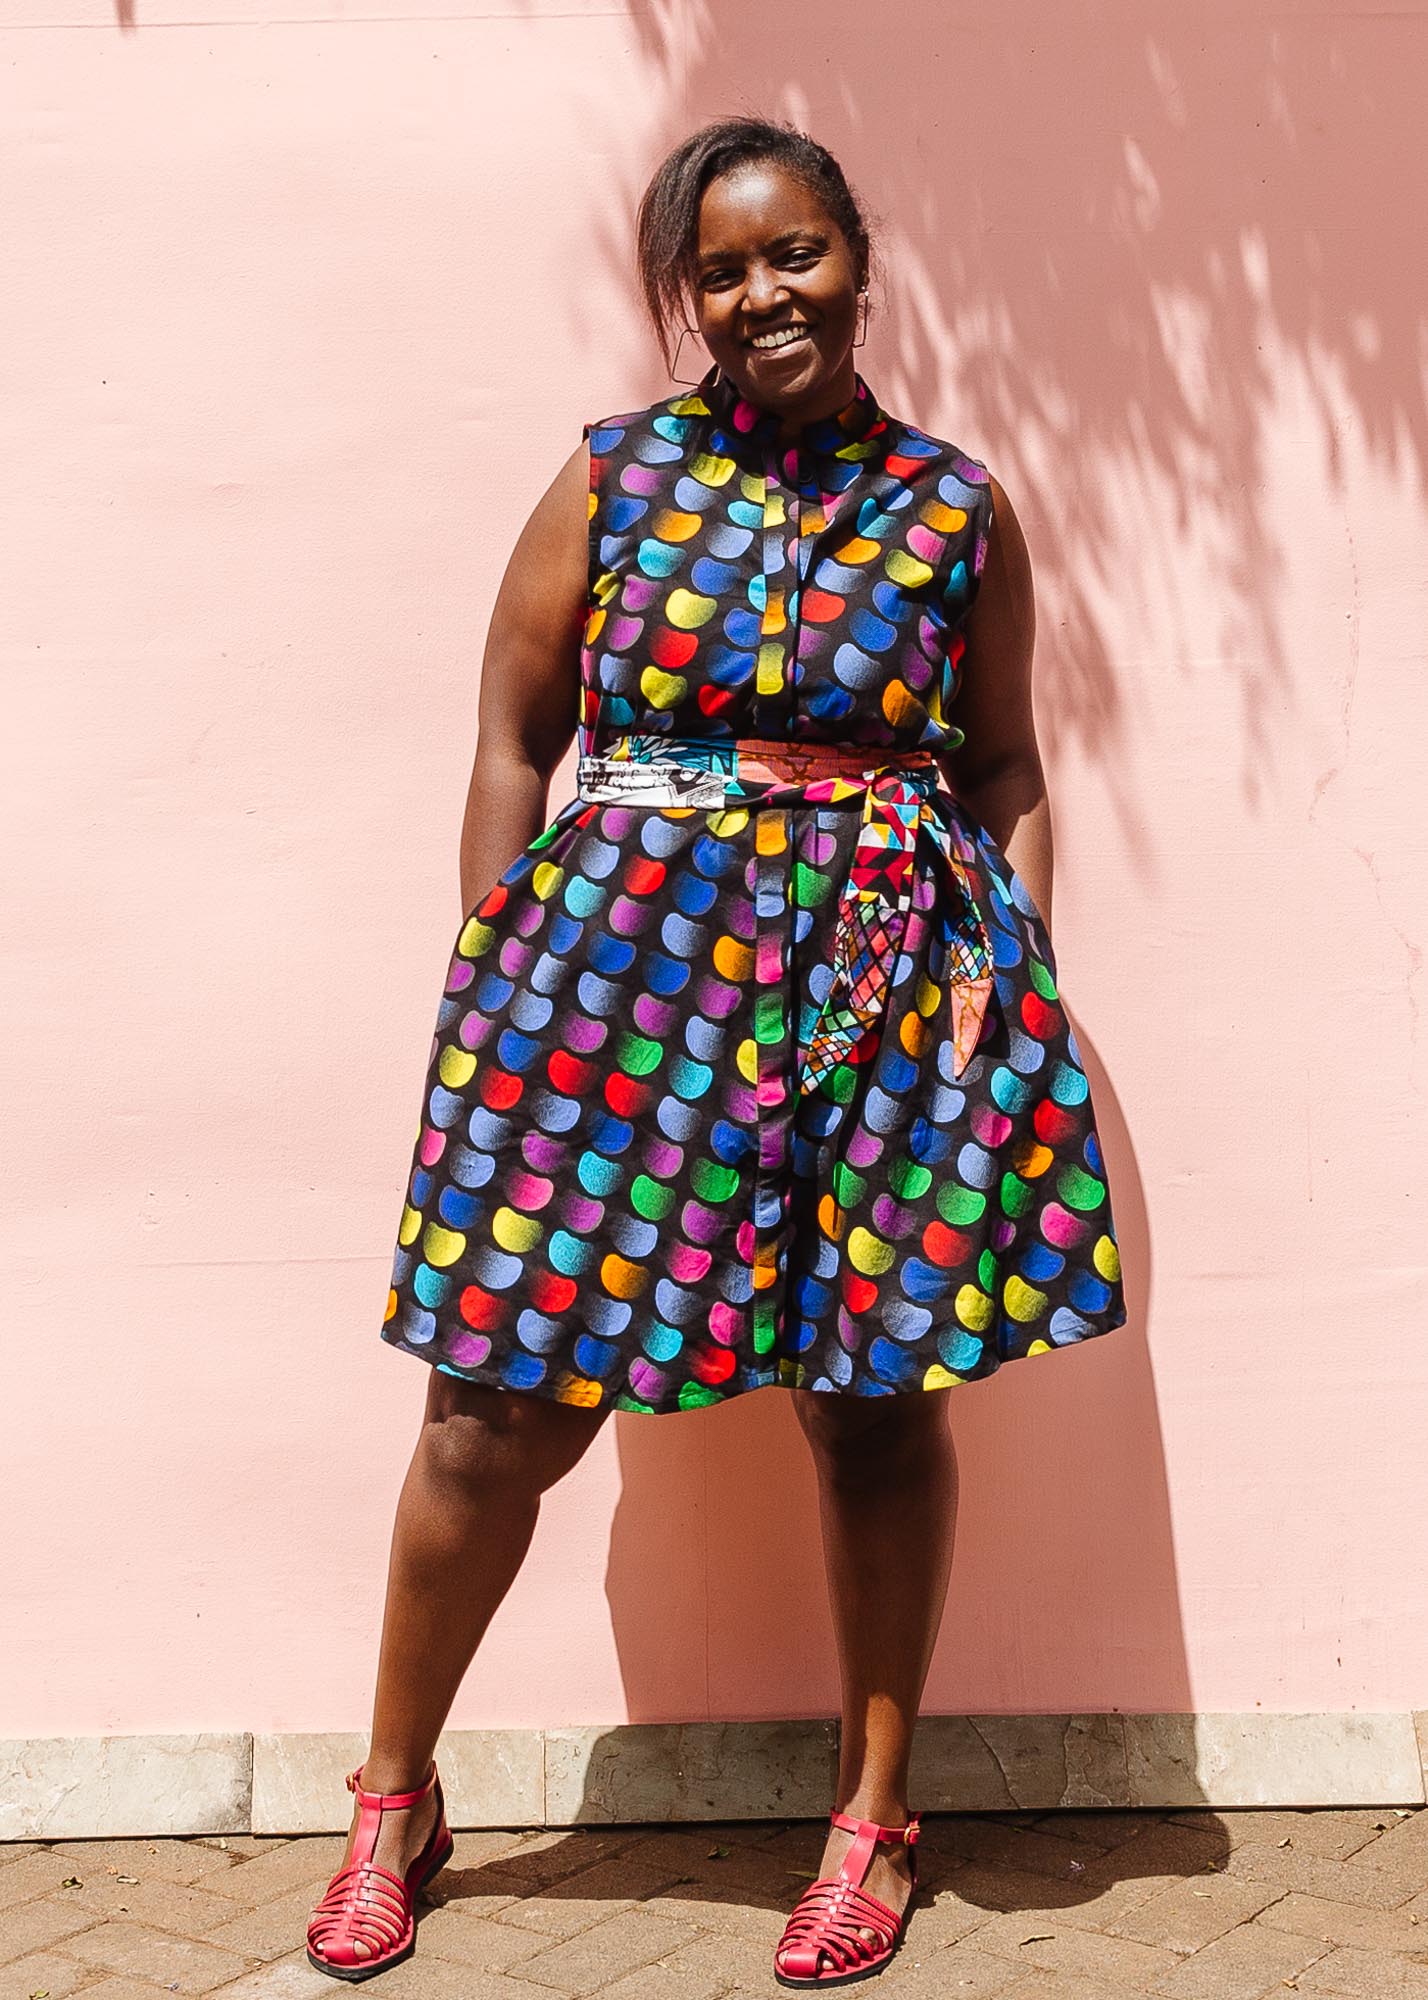 The model is wearing black dress with colorful panel